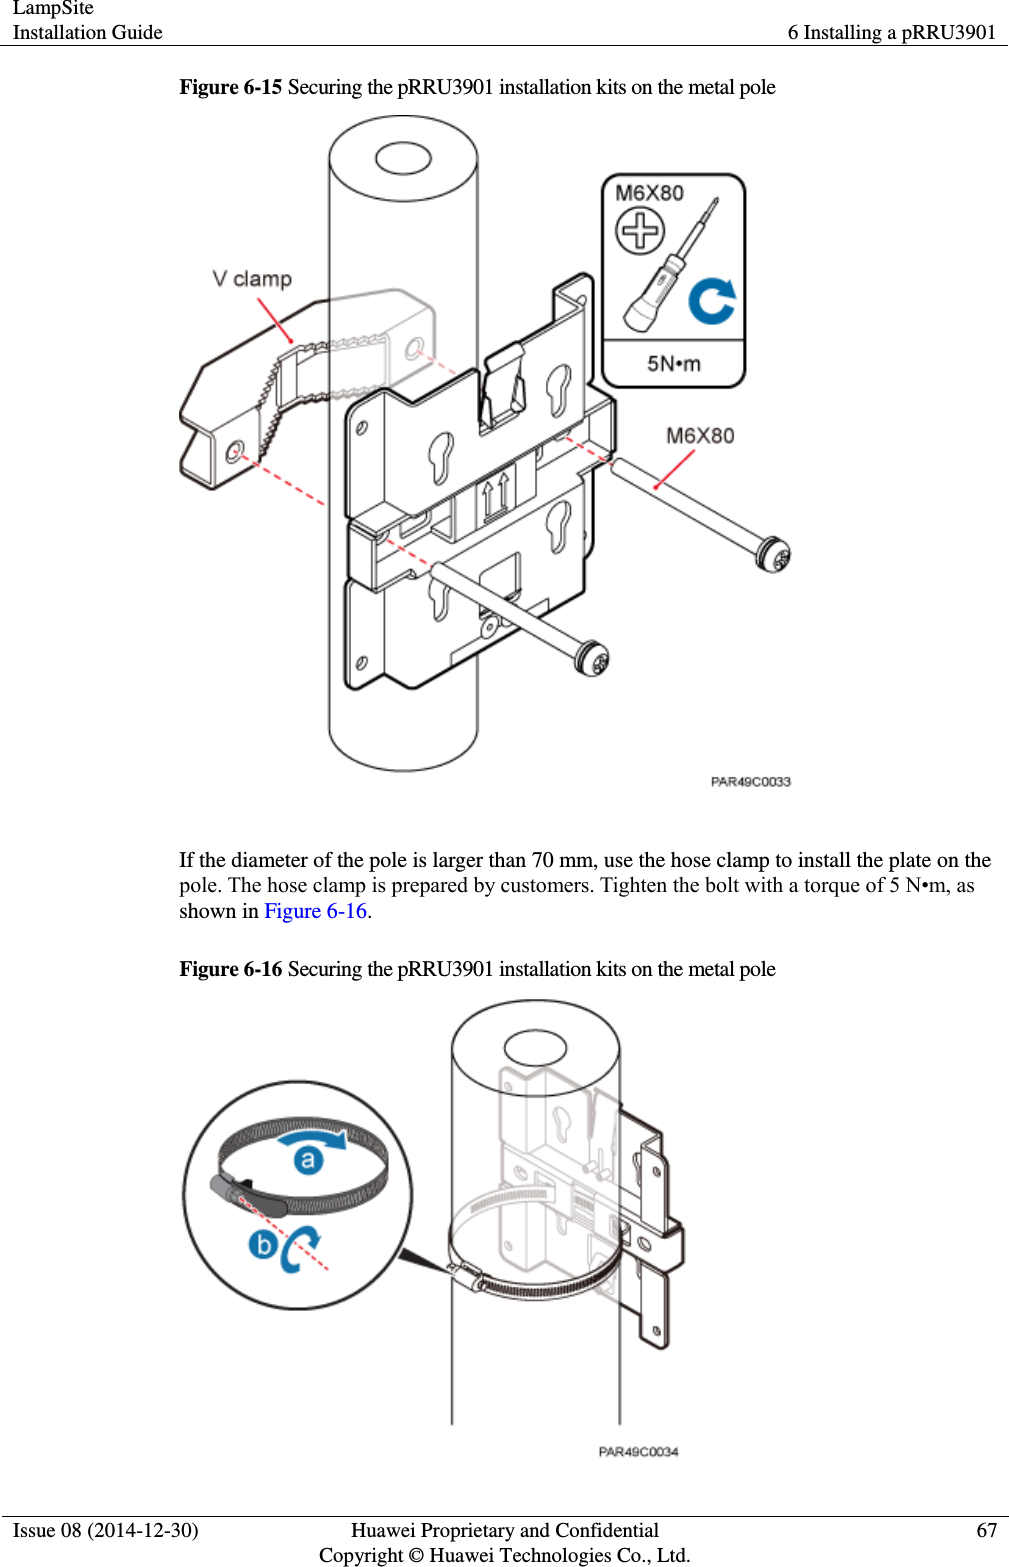 LampSite Installation Guide 6 Installing a pRRU3901  Issue 08 (2014-12-30) Huawei Proprietary and Confidential                                     Copyright © Huawei Technologies Co., Ltd. 67  Figure 6-15 Securing the pRRU3901 installation kits on the metal pole   If the diameter of the pole is larger than 70 mm, use the hose clamp to install the plate on the pole. The hose clamp is prepared by customers. Tighten the bolt with a torque of 5 N•m, as shown in Figure 6-16. Figure 6-16 Securing the pRRU3901 installation kits on the metal pole  